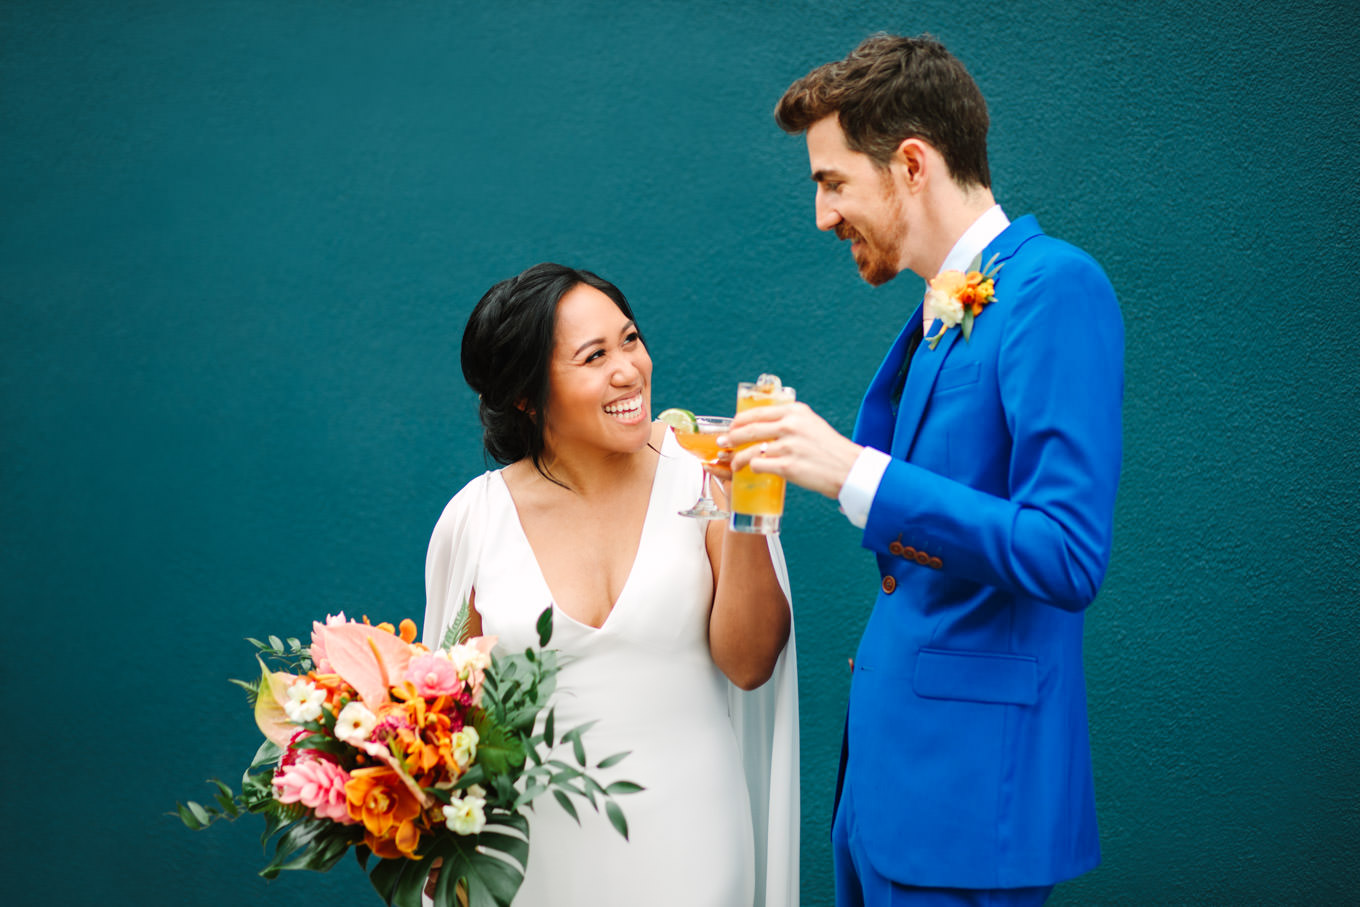 Bride and groom with cocktails | TV inspired wedding at The Fig House Los Angeles | Published on The Knot | Fresh and colorful photography for fun-loving couples in Southern California | #losangeleswedding #TVwedding #colorfulwedding #theknot   Source: Mary Costa Photography | Los Angeles wedding photographer